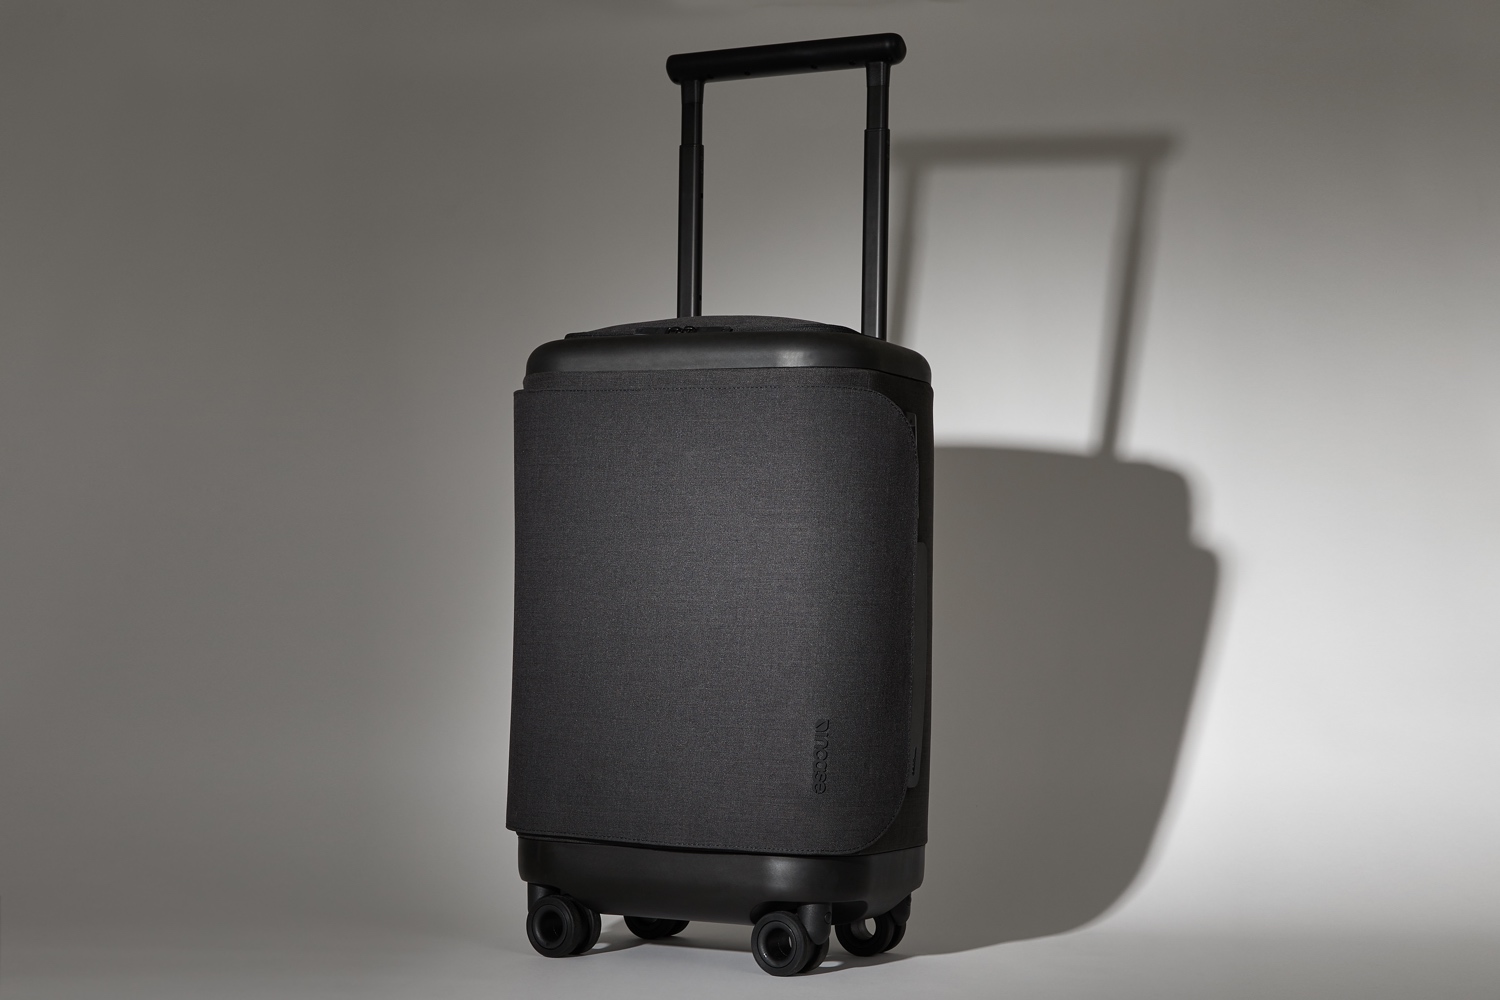 incase proconnected 4 wheel hubless roller smart luggage blends high design with large capacity battery studio0123